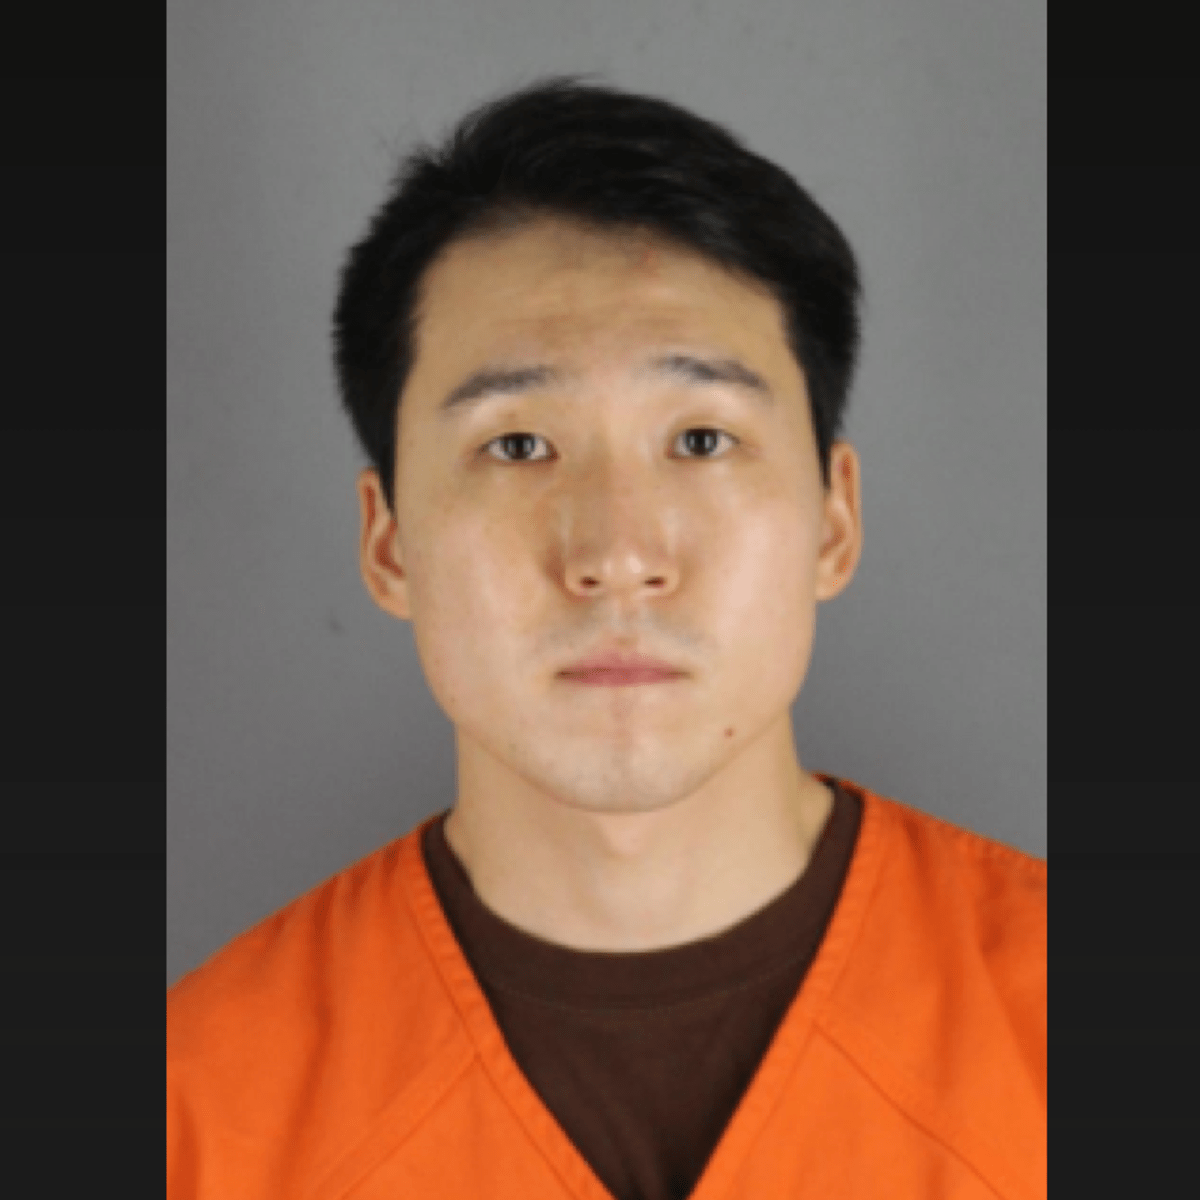 Charges Eden Prairie taekwondo instructor raped student multiple times